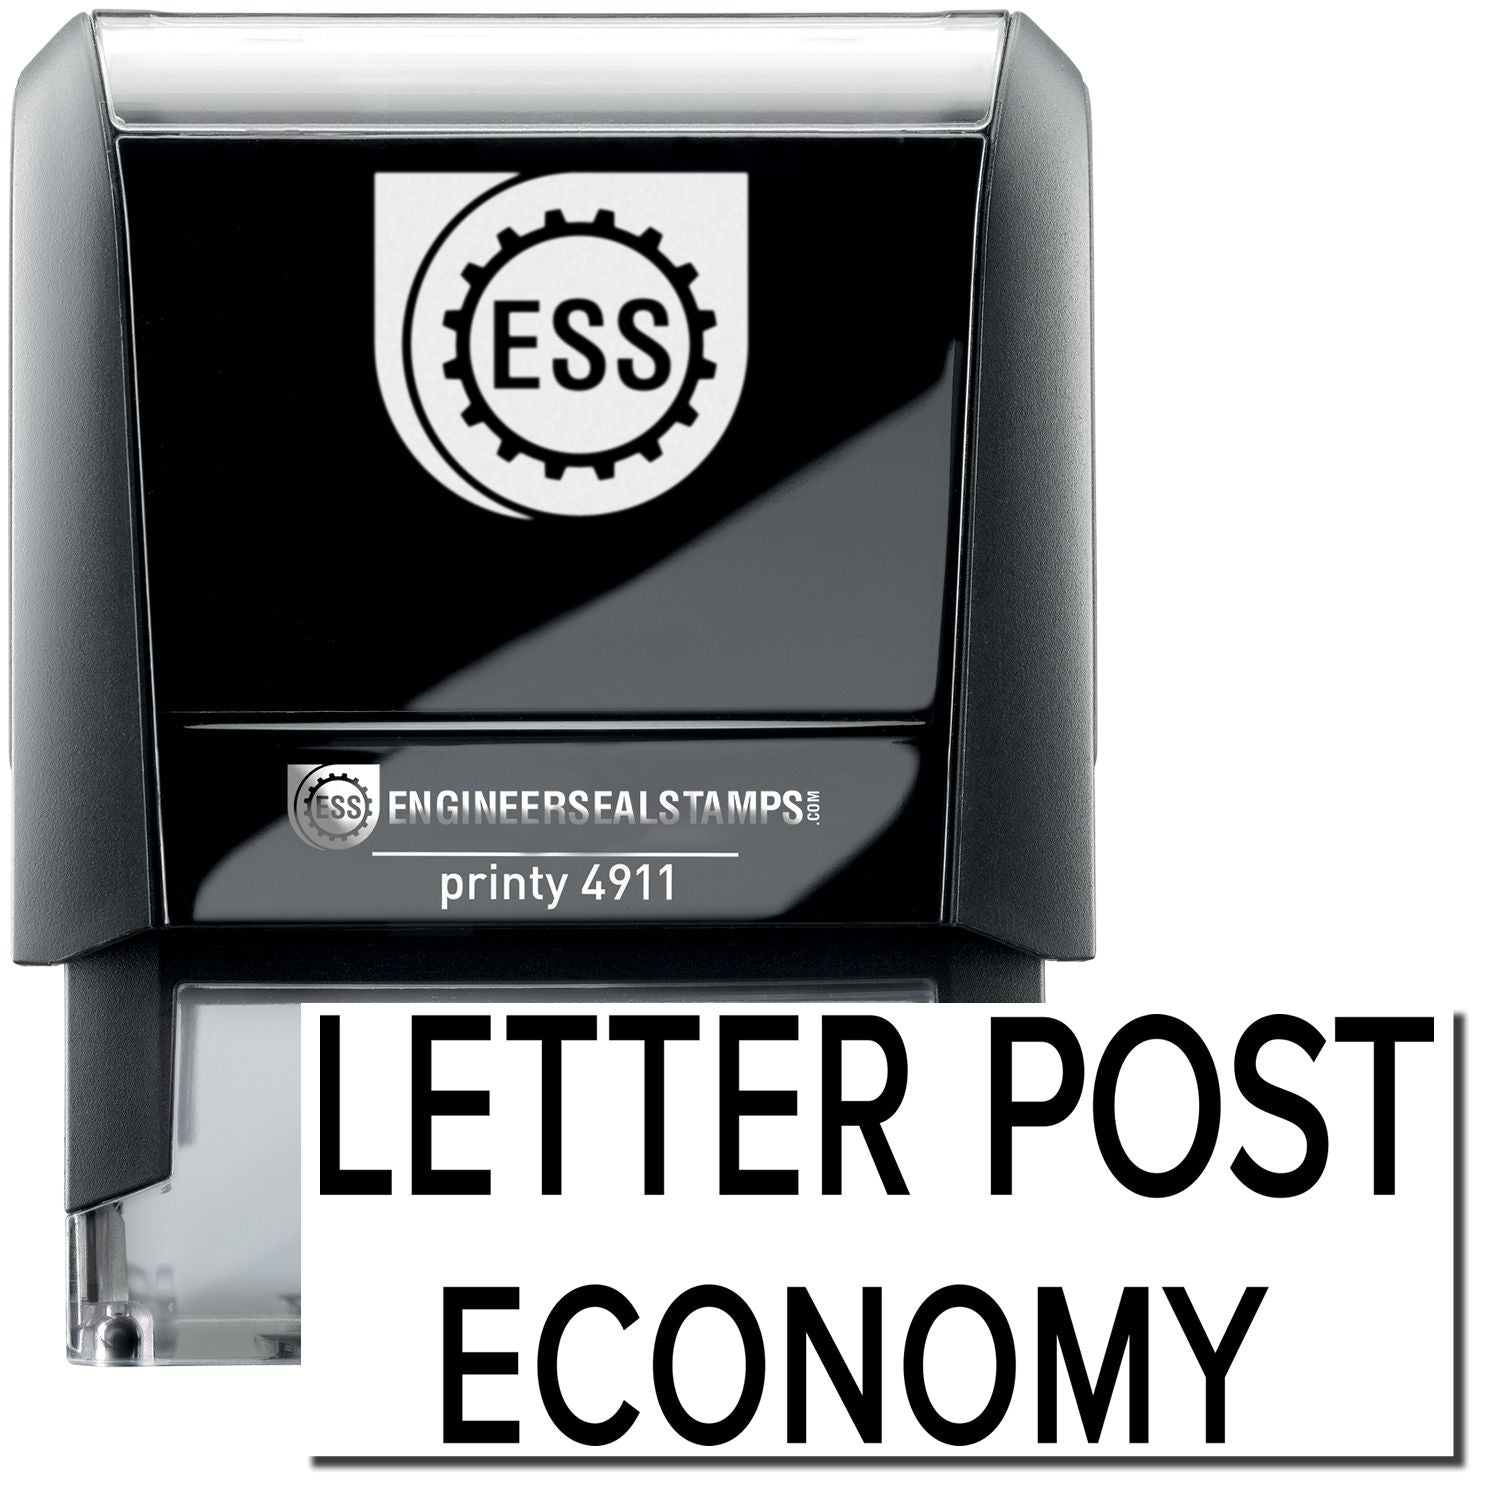 A self-inking stamp with a stamped image showing how the text "LETTER POST ECONOMY" is displayed after stamping.